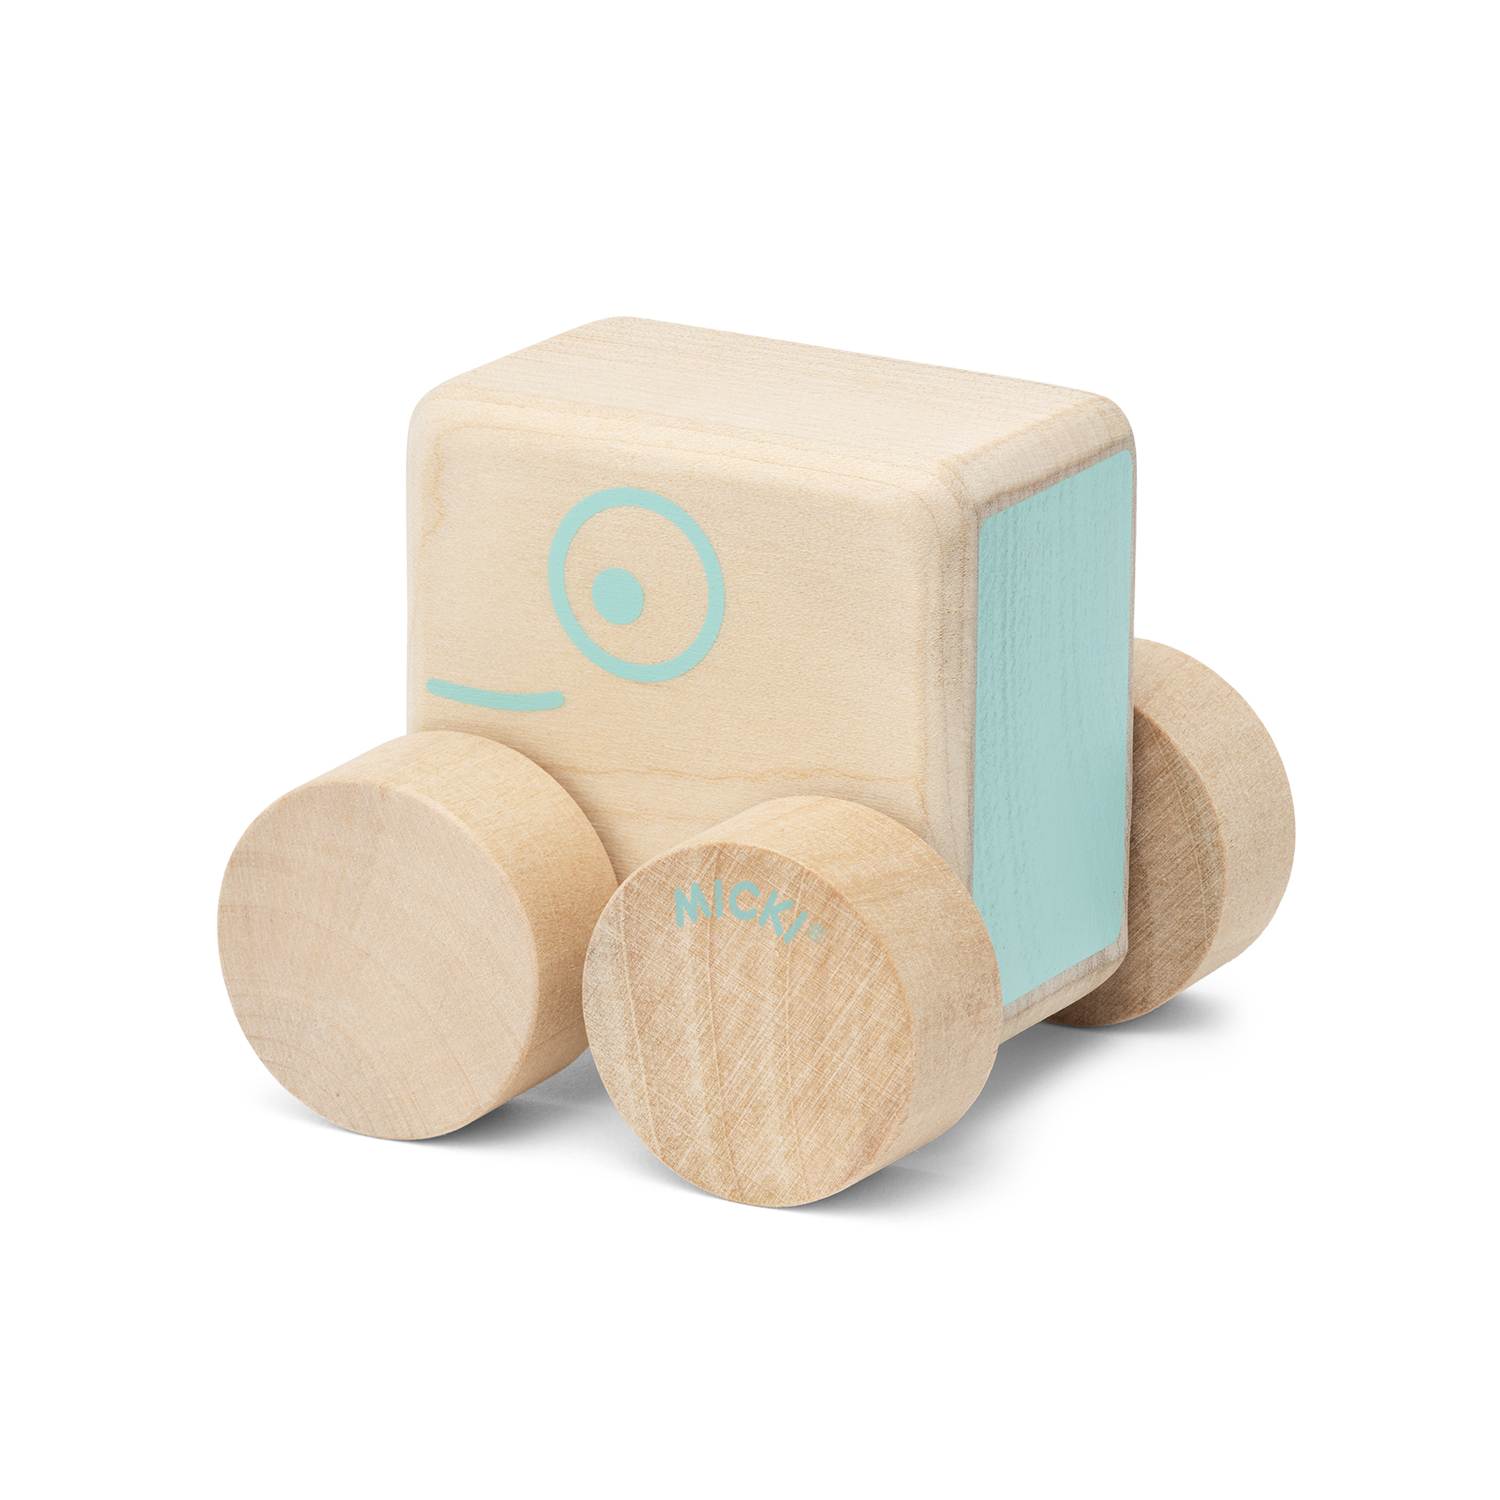 Toy cars micki toy car square natural wood